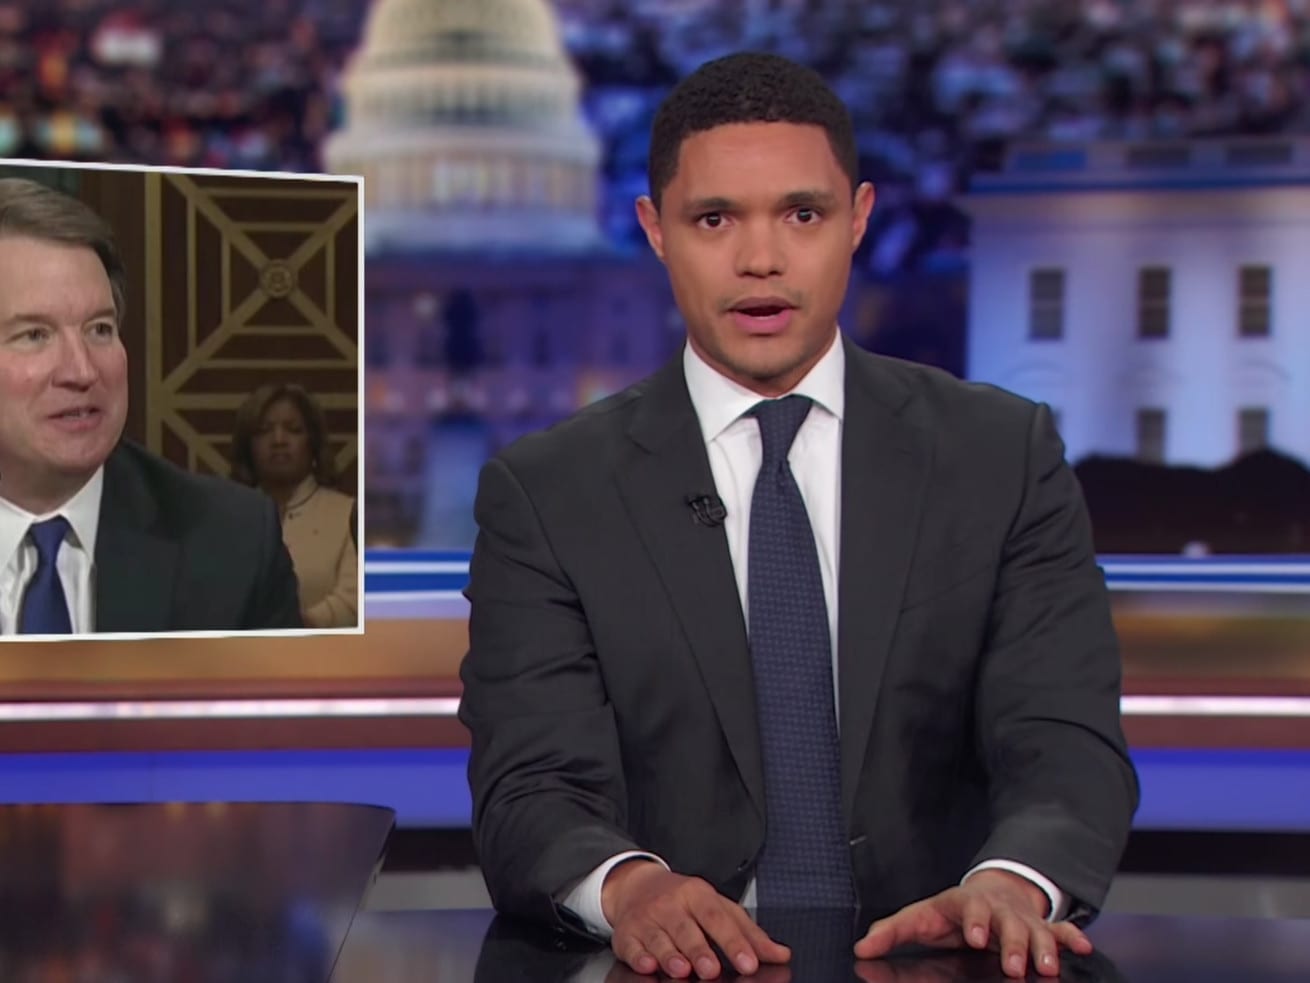 Watch: The Daily Show’s Trevor Noah calls Kavanaugh’s testimony a look at “the real Brett”